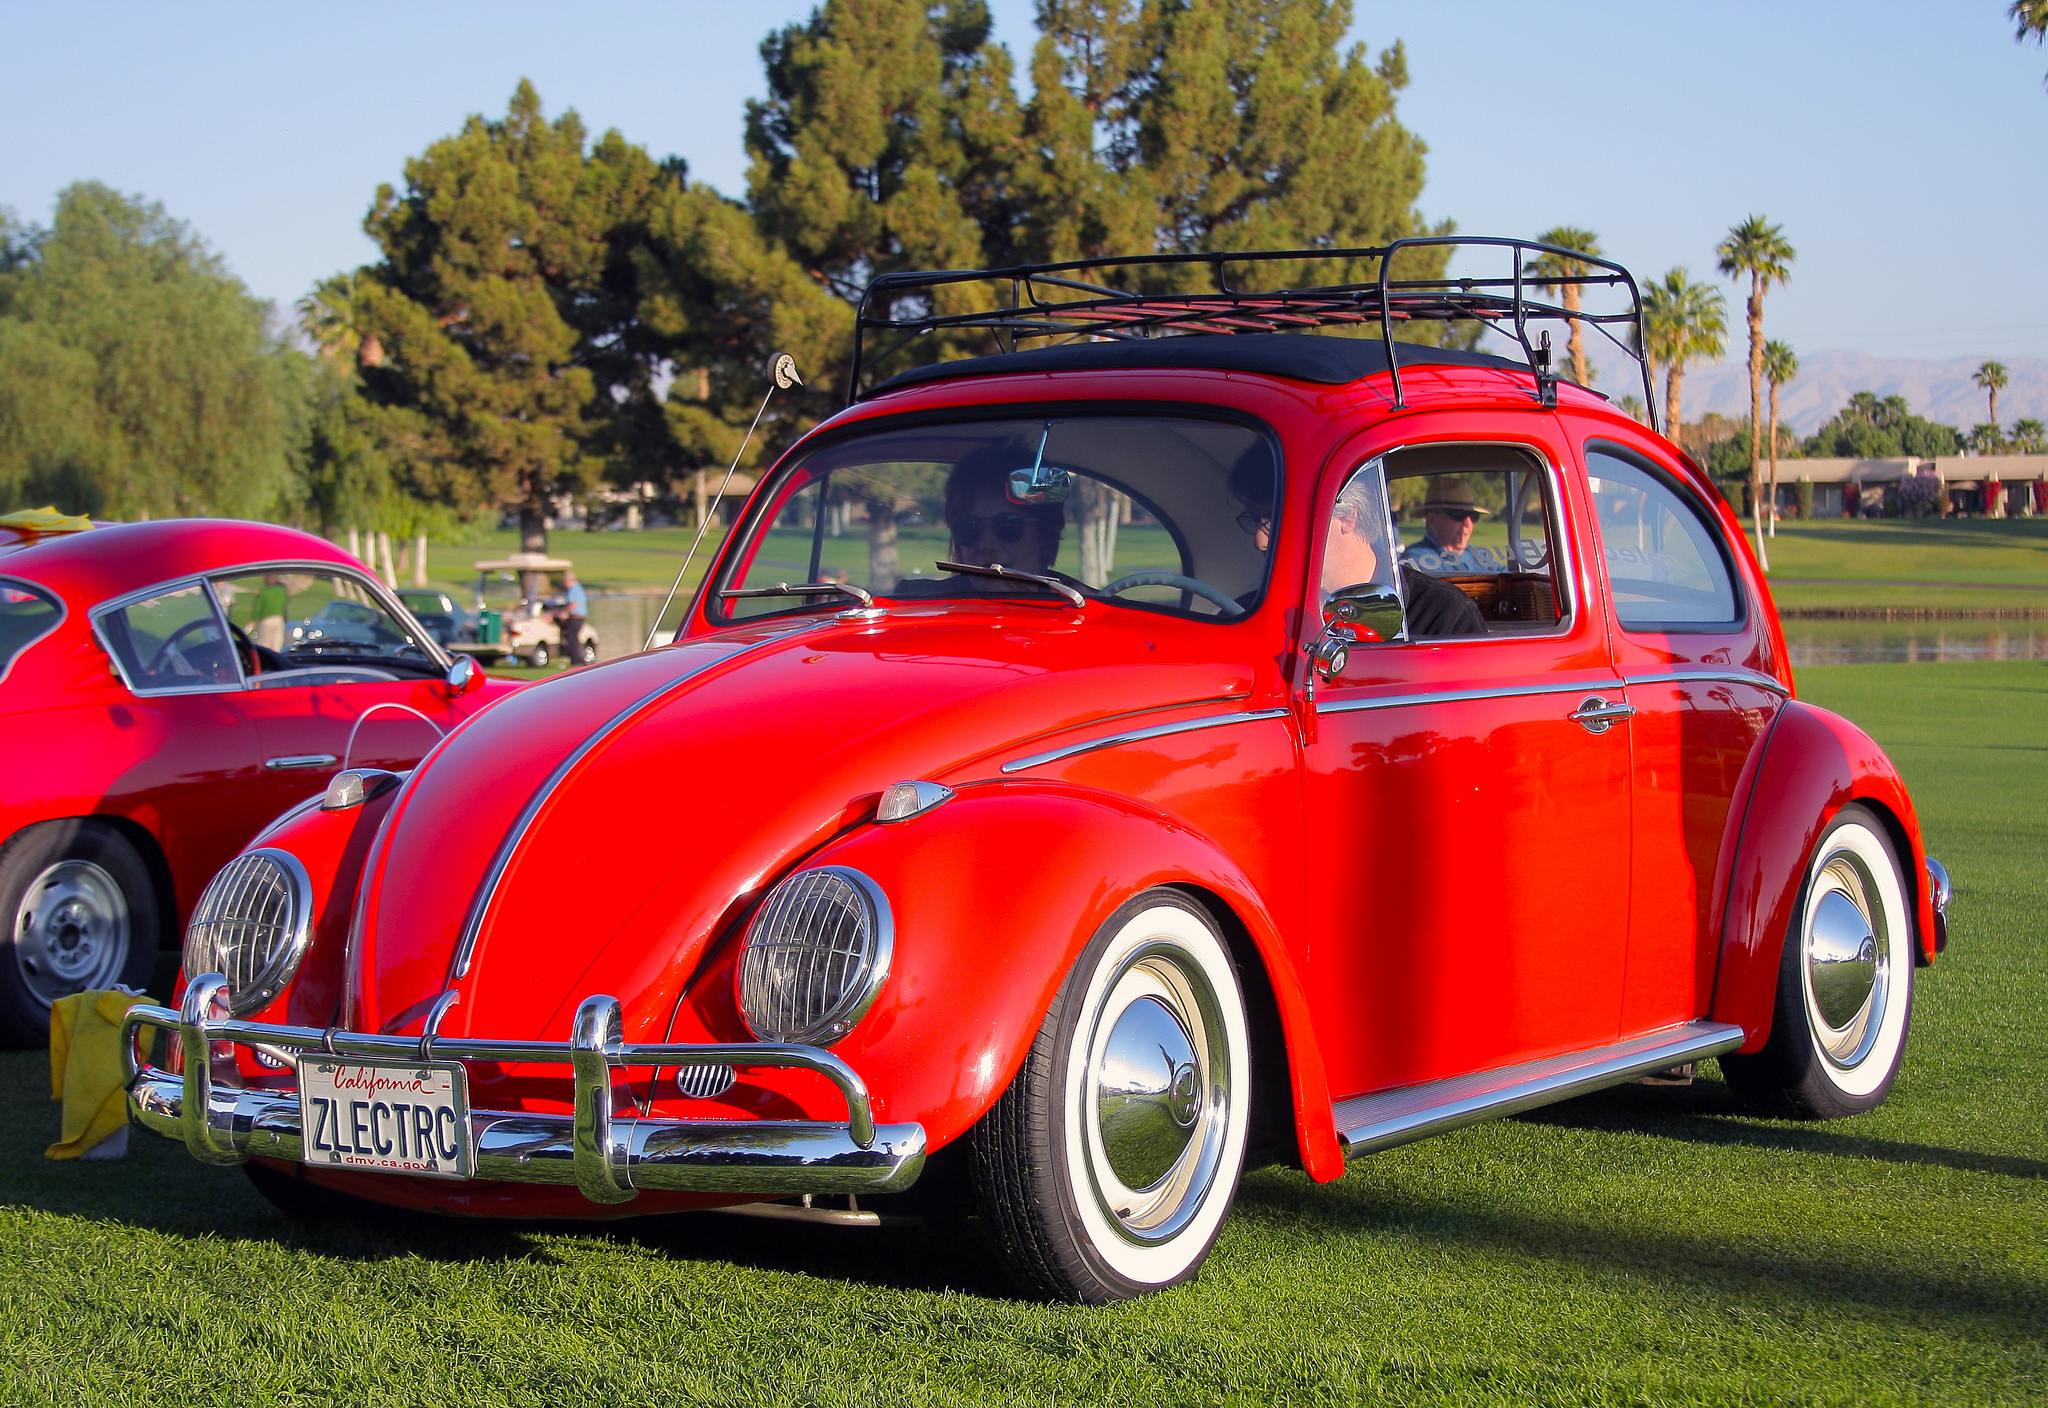 ever wanted an electric vw beetle zelectric motors has you covered